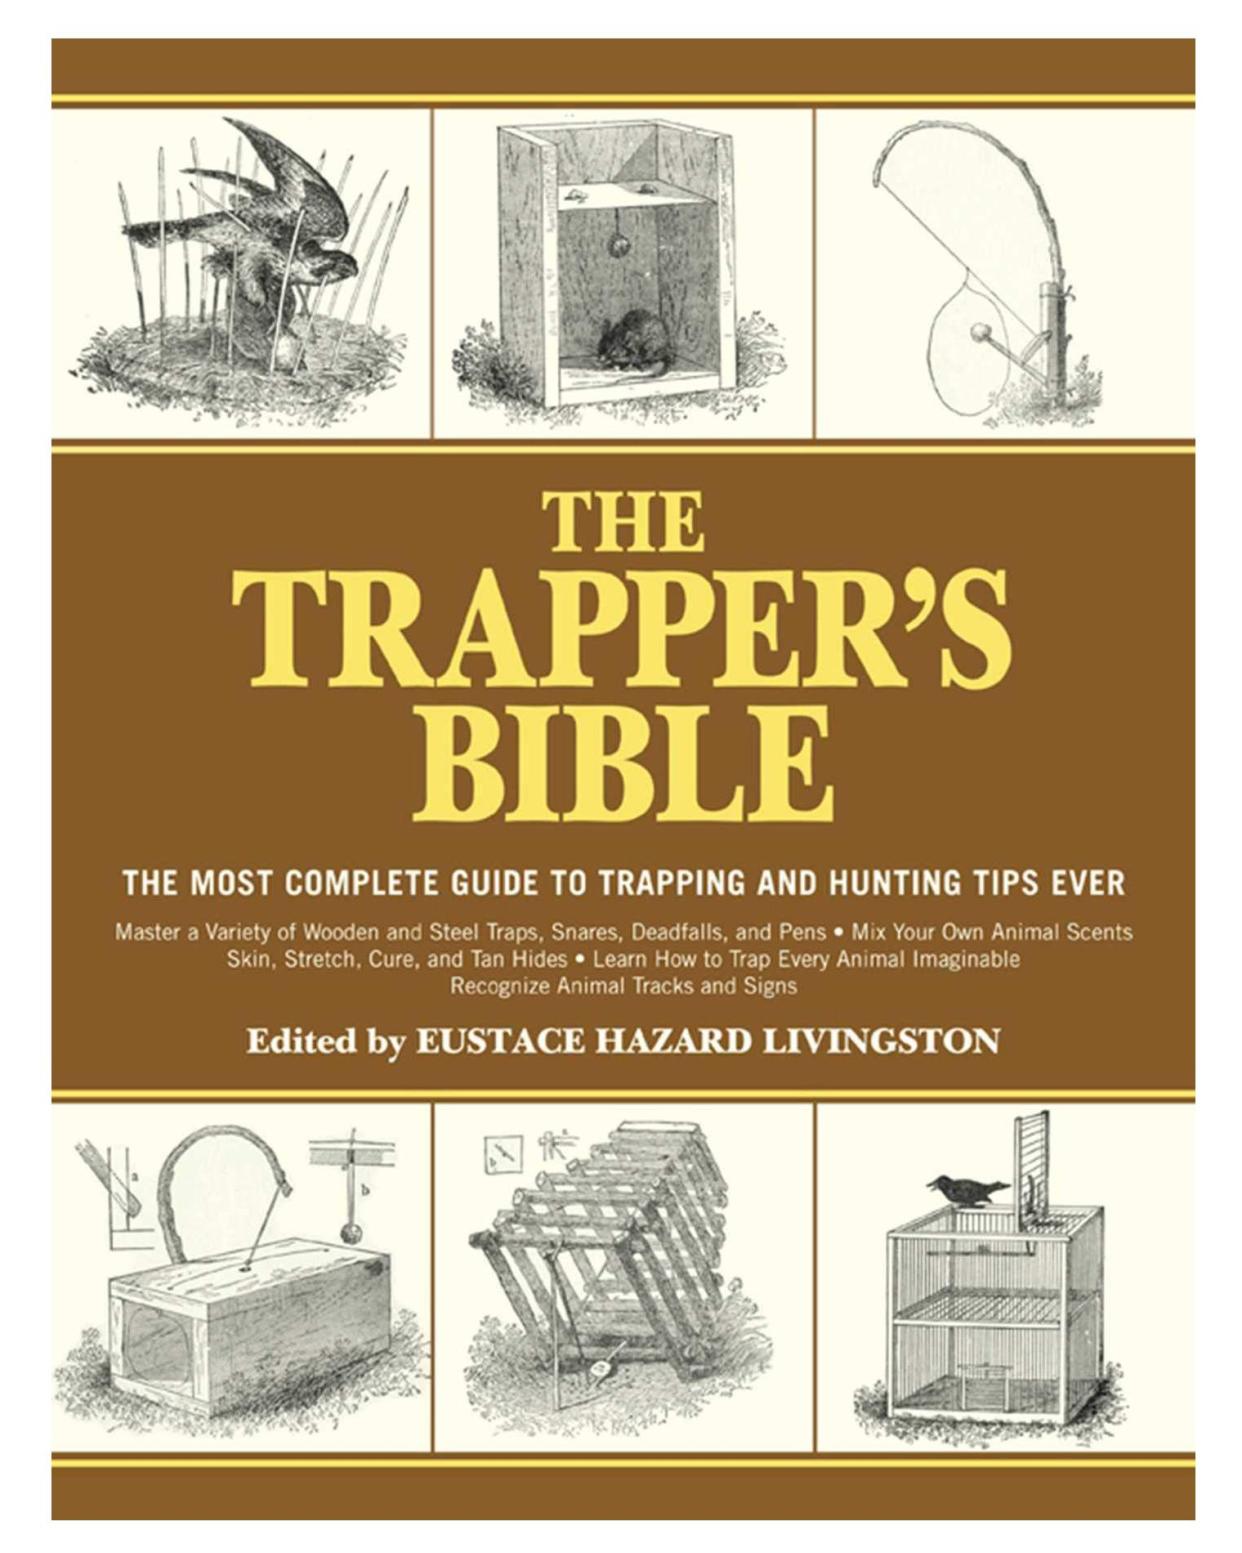 'The Trapper's Bible'